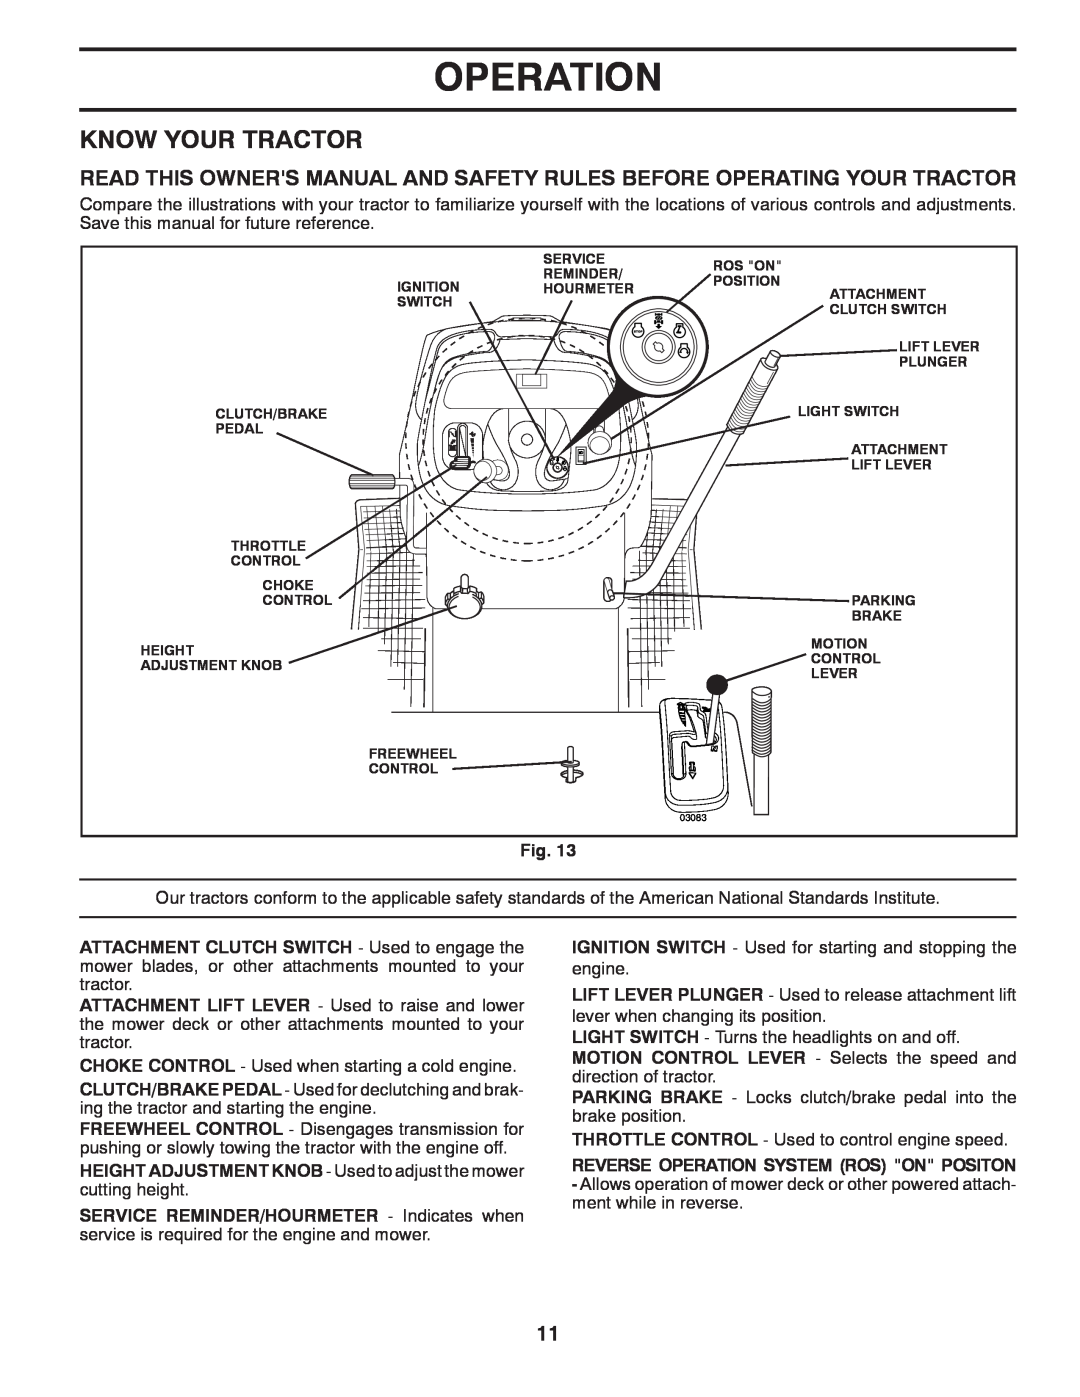 Husqvarna CTH2036T manual Know Your Tractor, Operation 